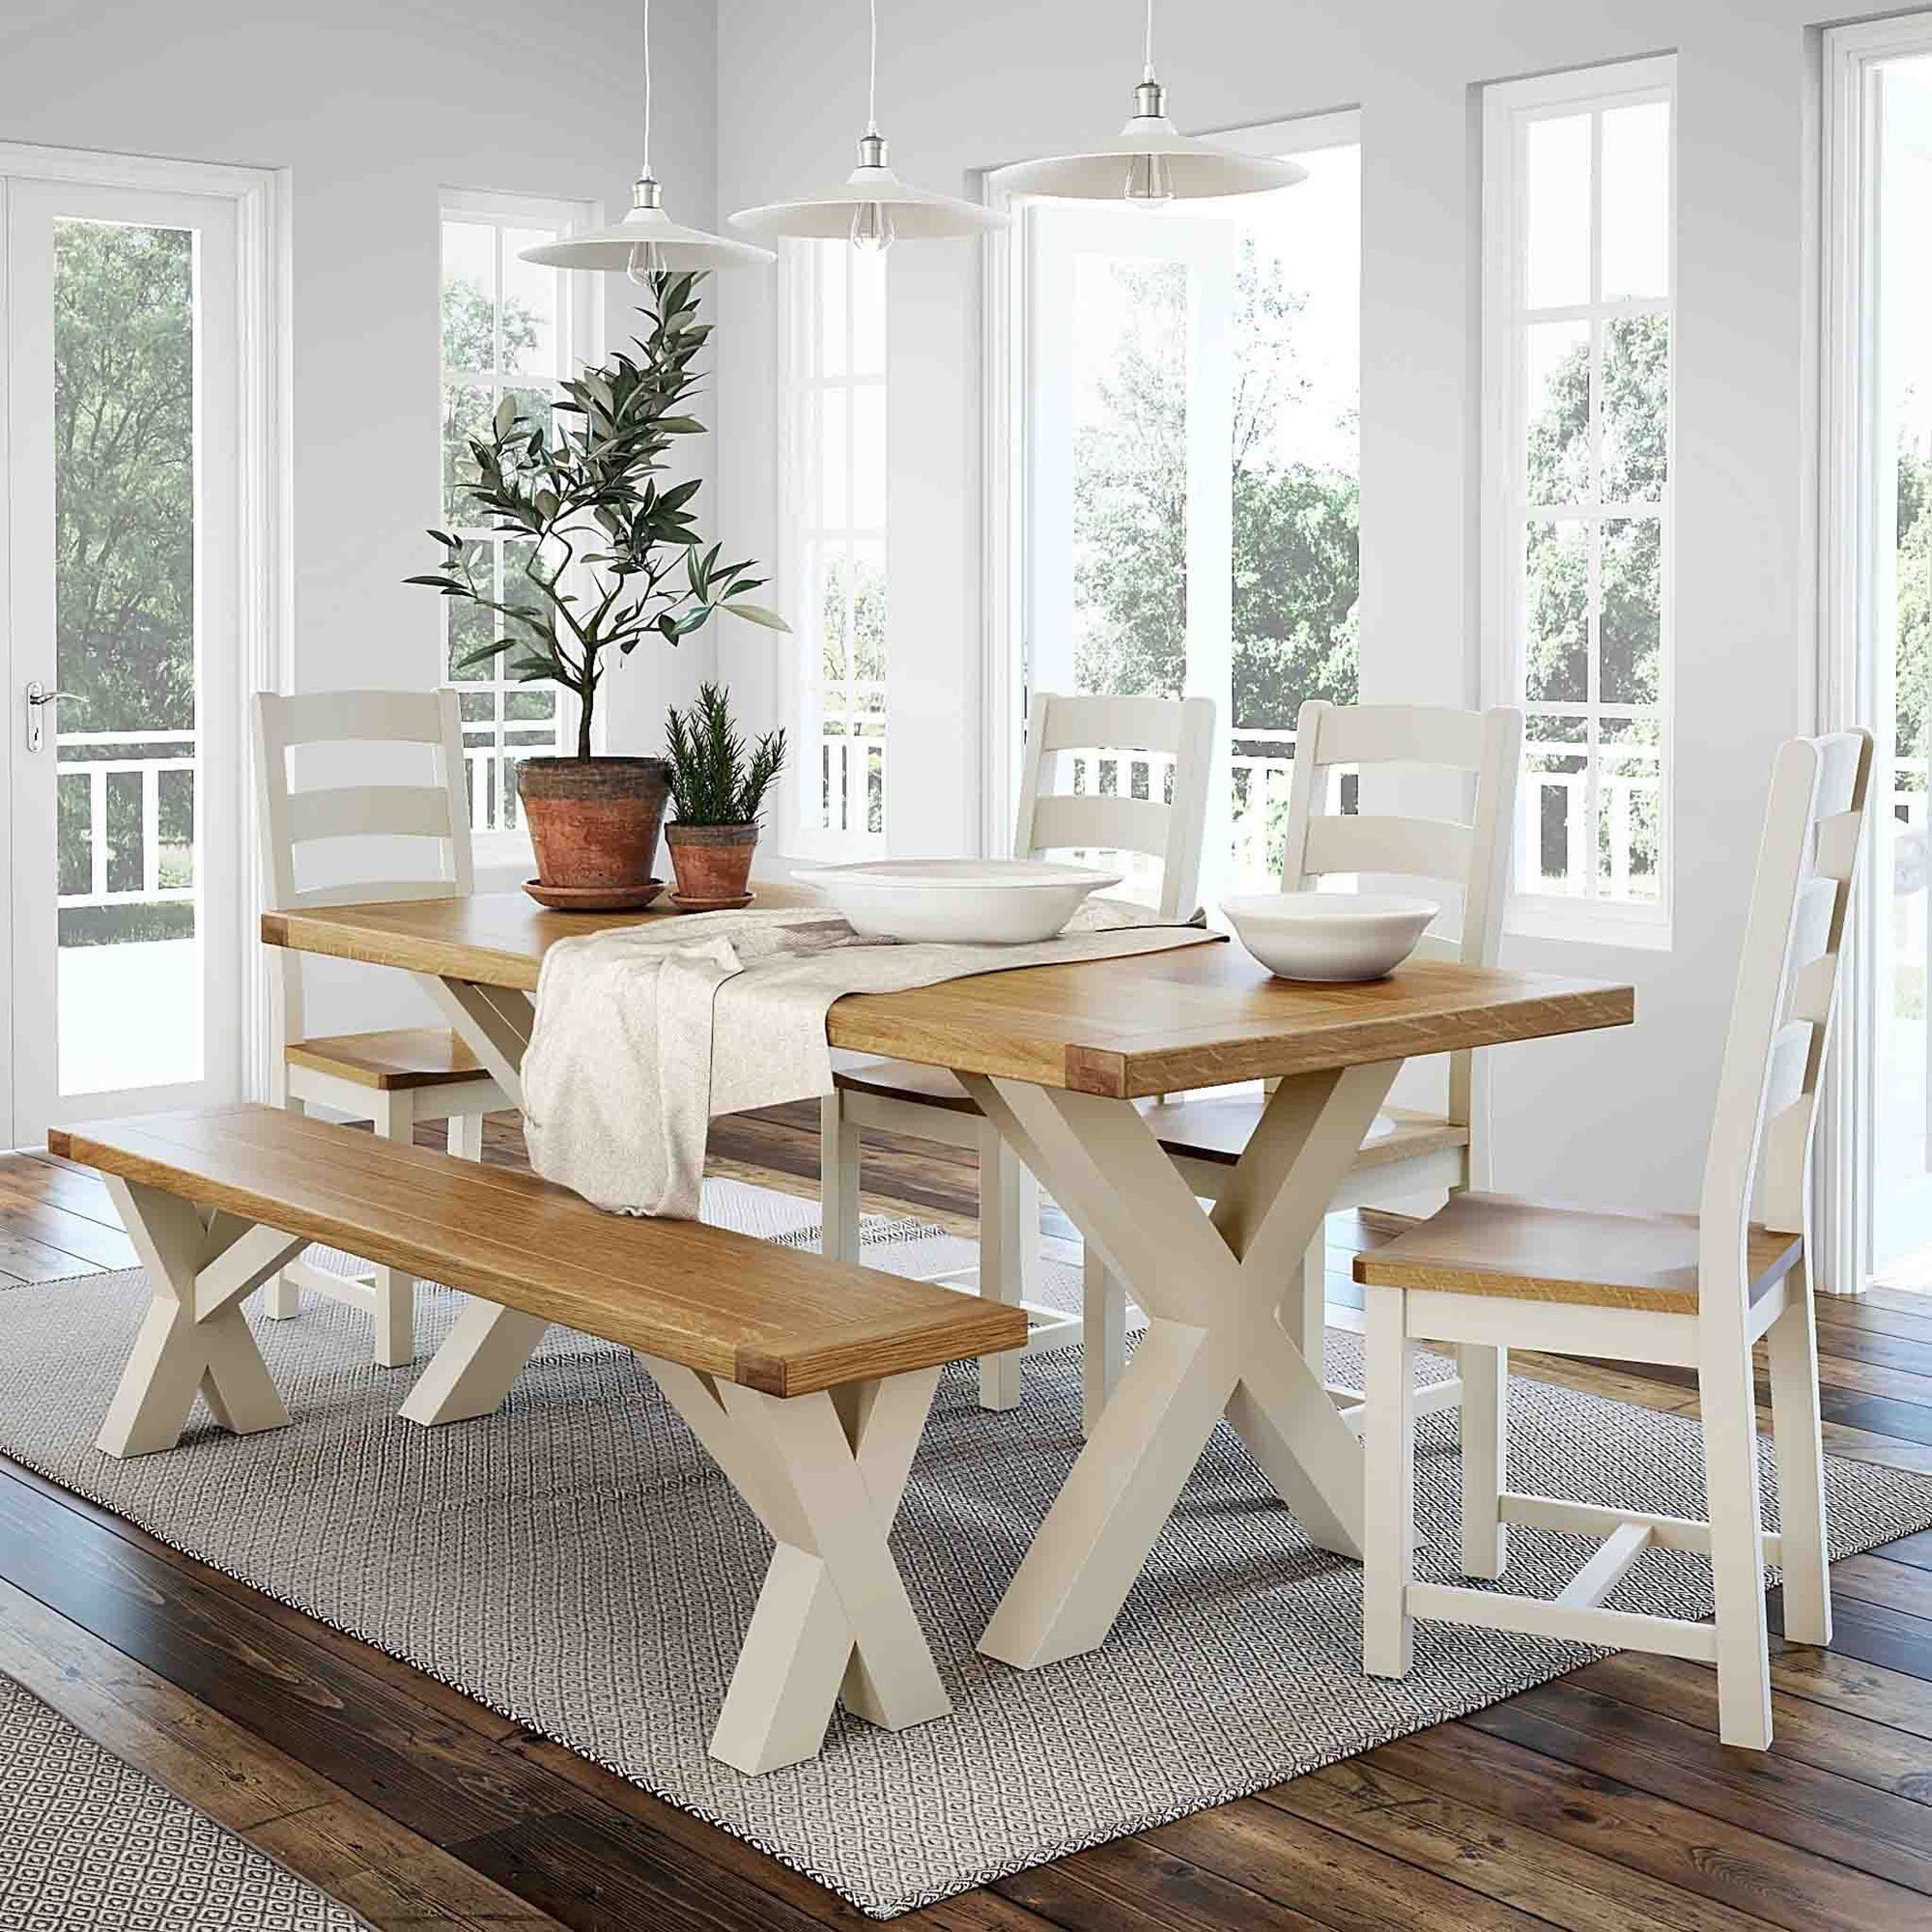 Cream Oak Dining Room Table And Chairs : Chelsea Cream Oak Dining Set